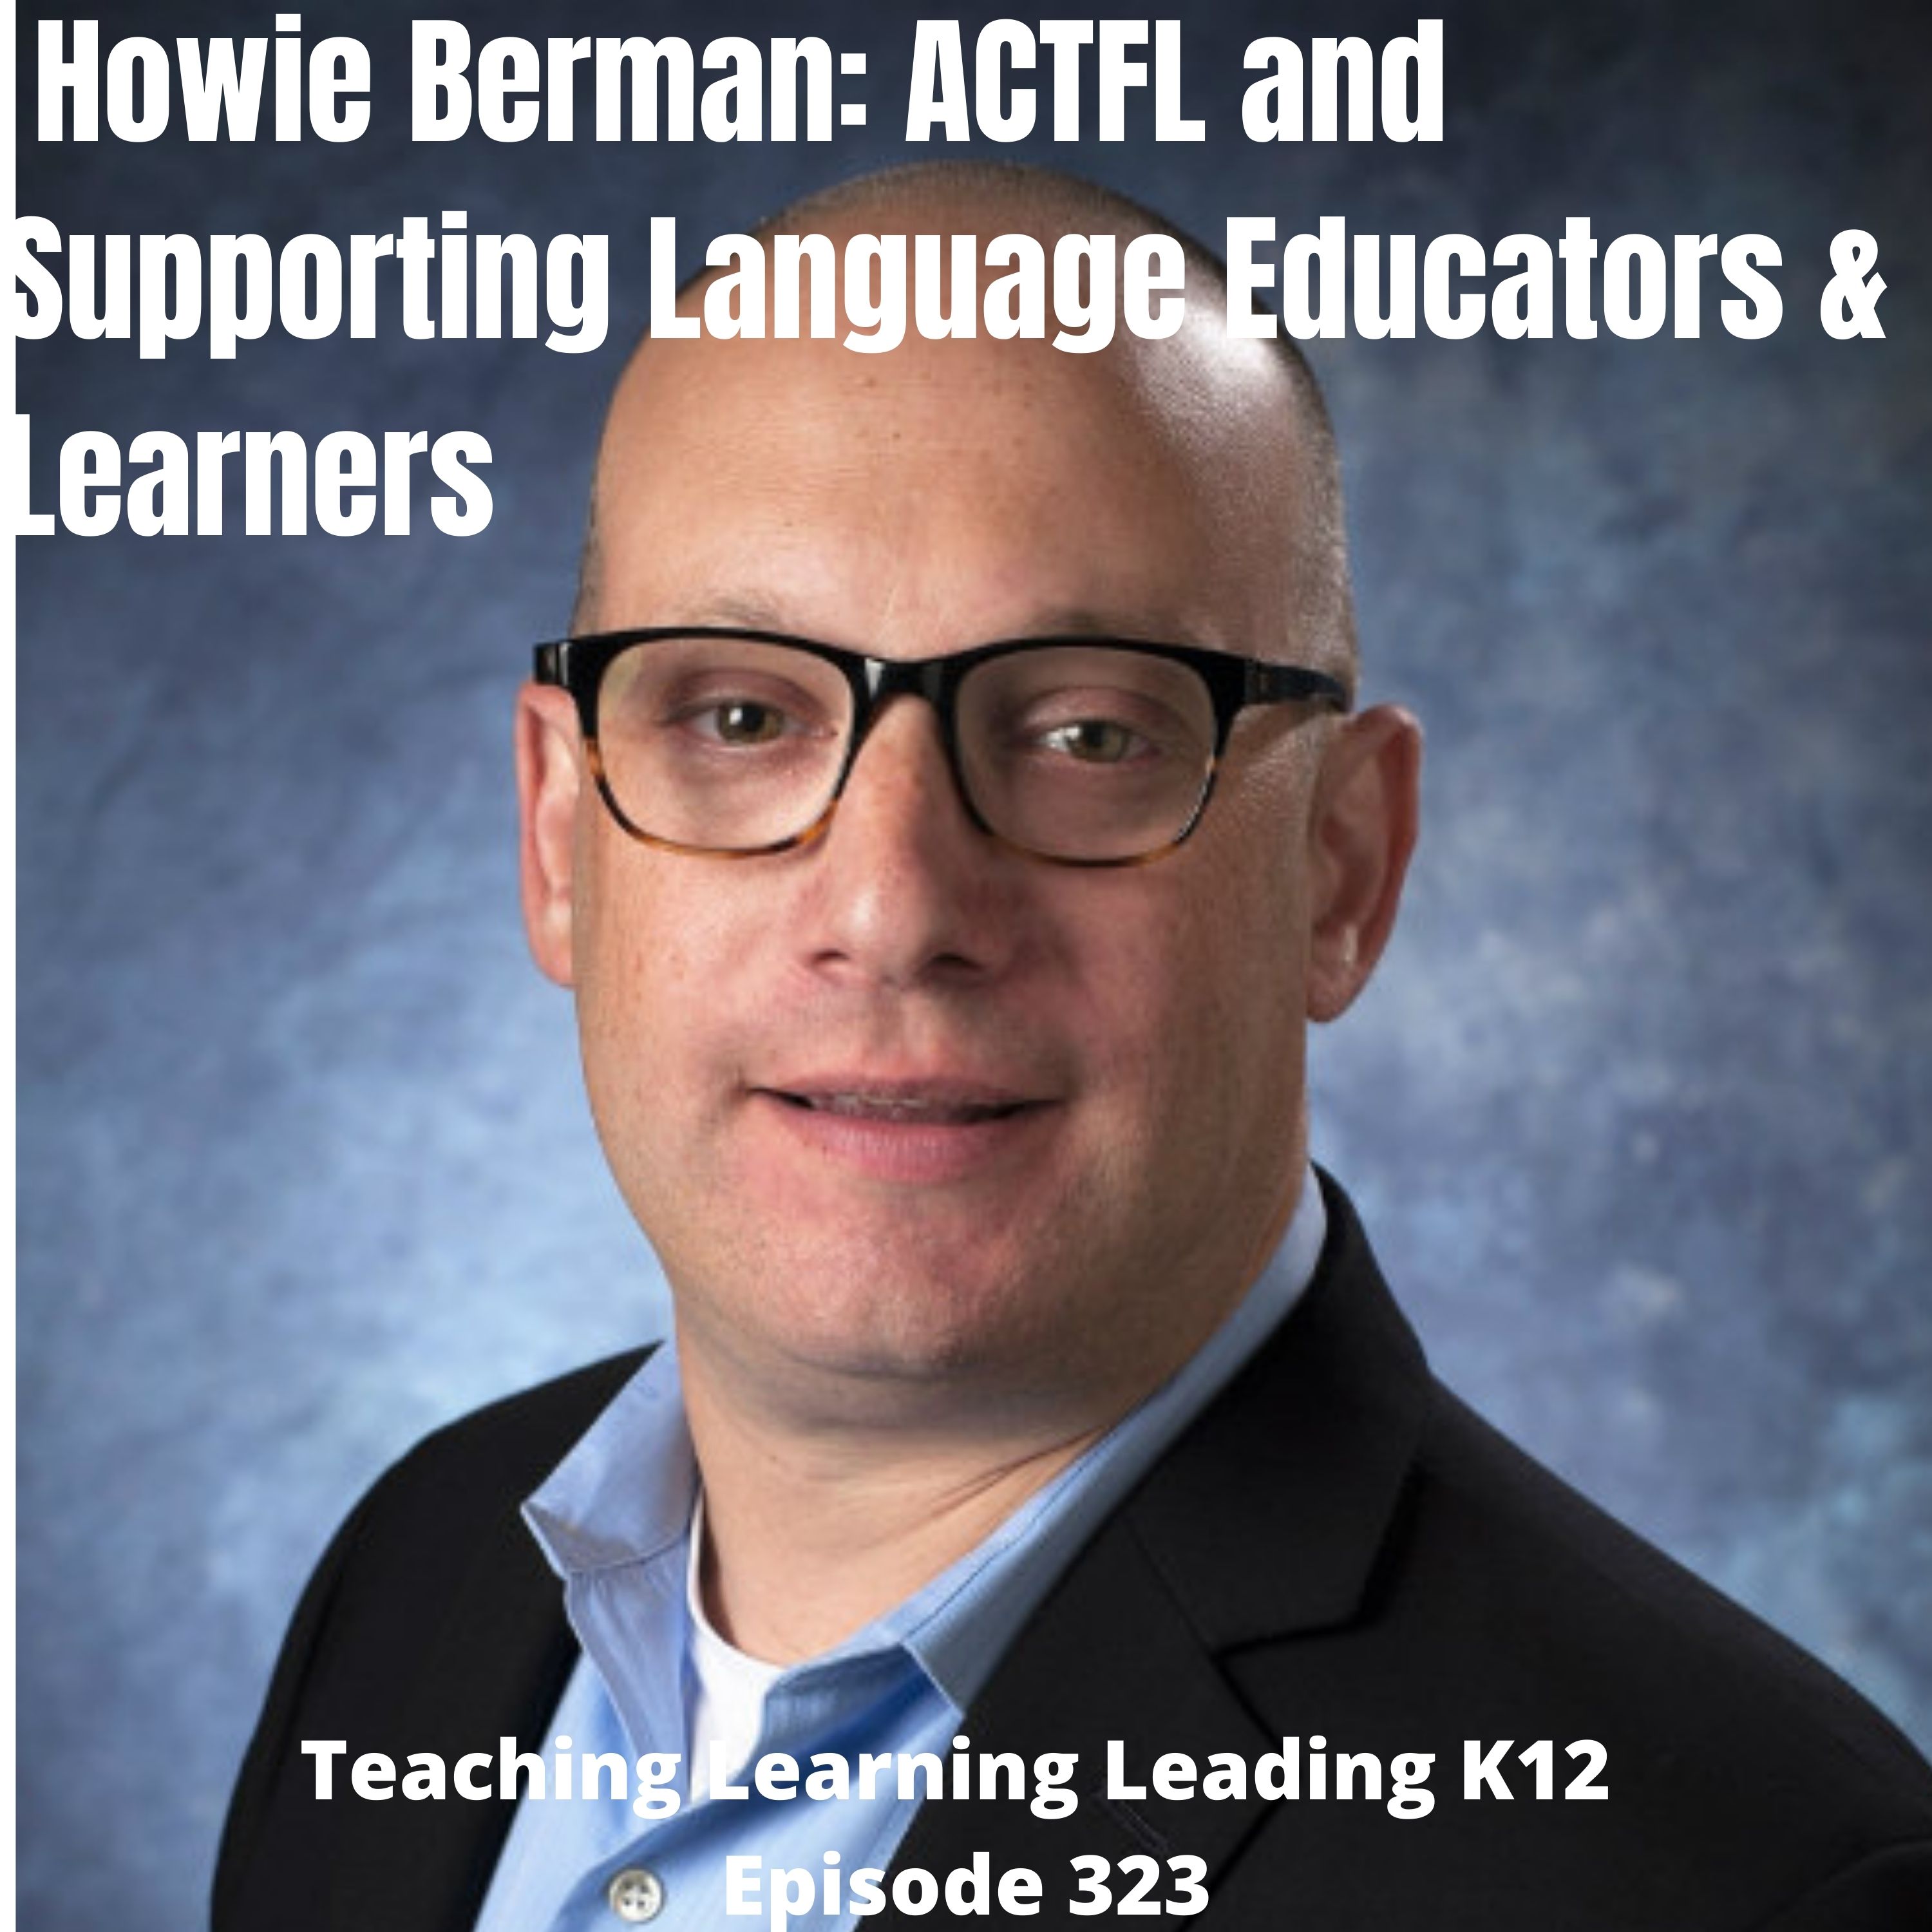 Howie Berman: ACTFL and Supporting Language Educators & Learners - 323